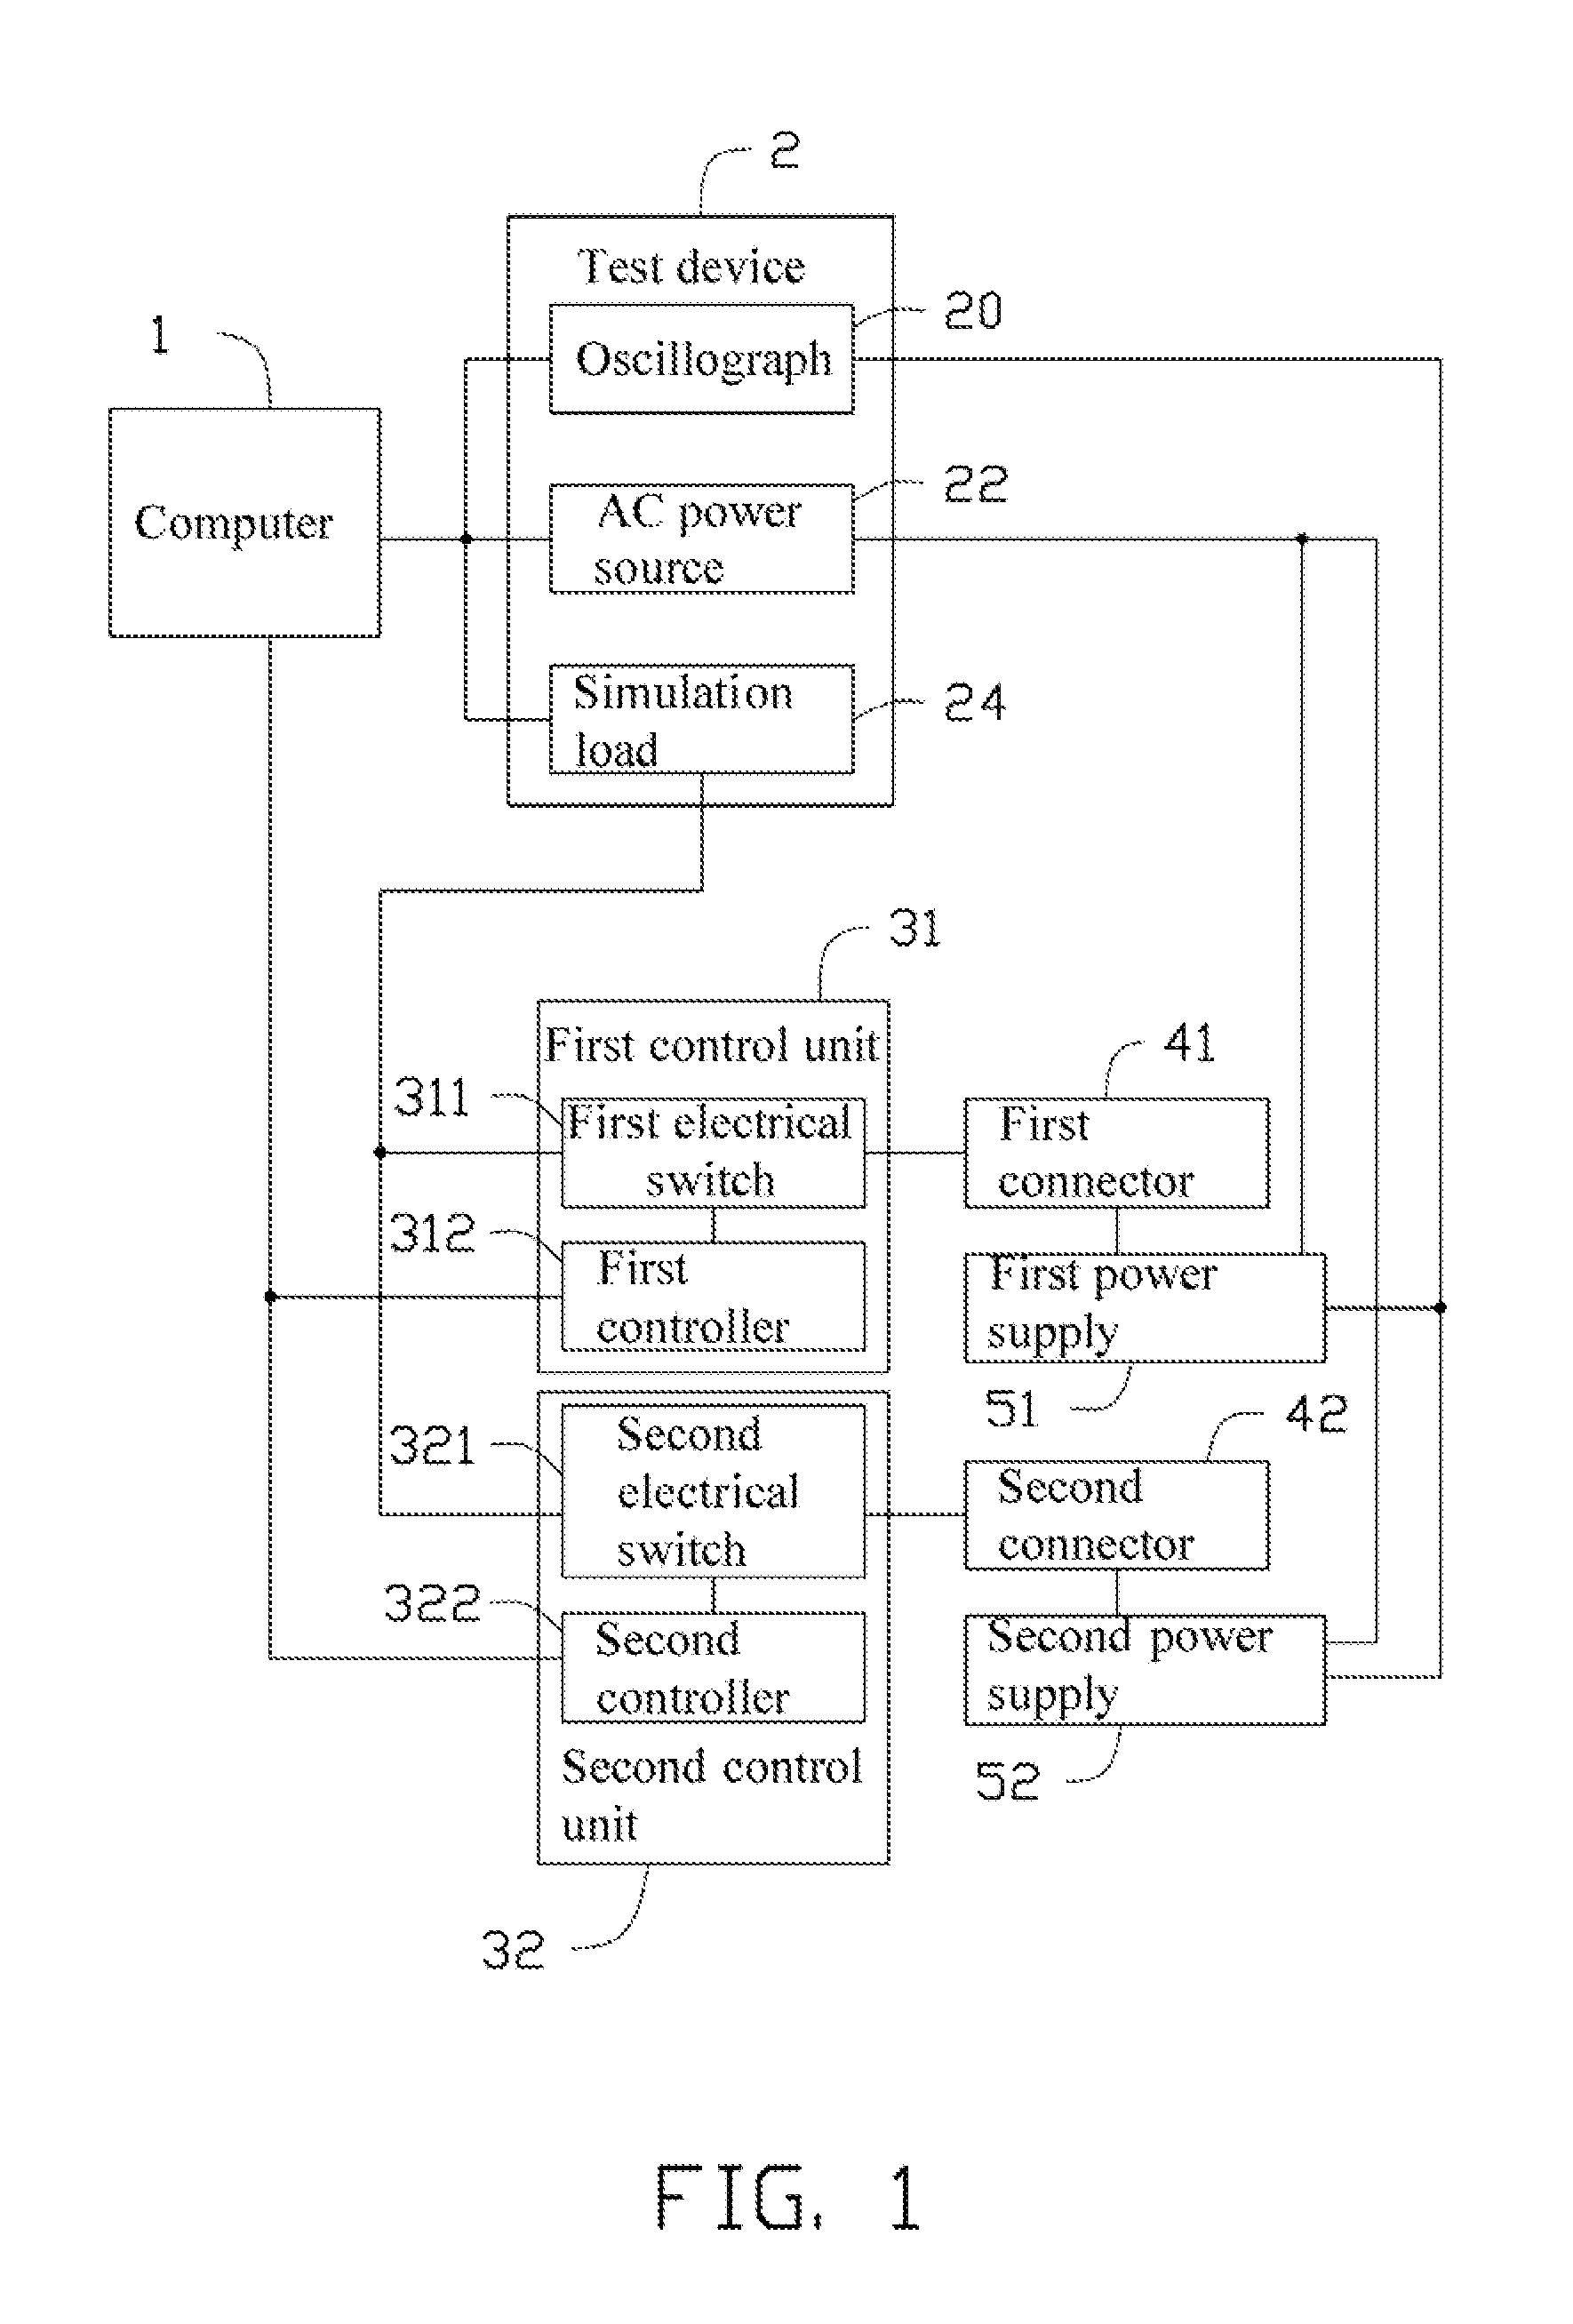 Automatic power supply testing system and method